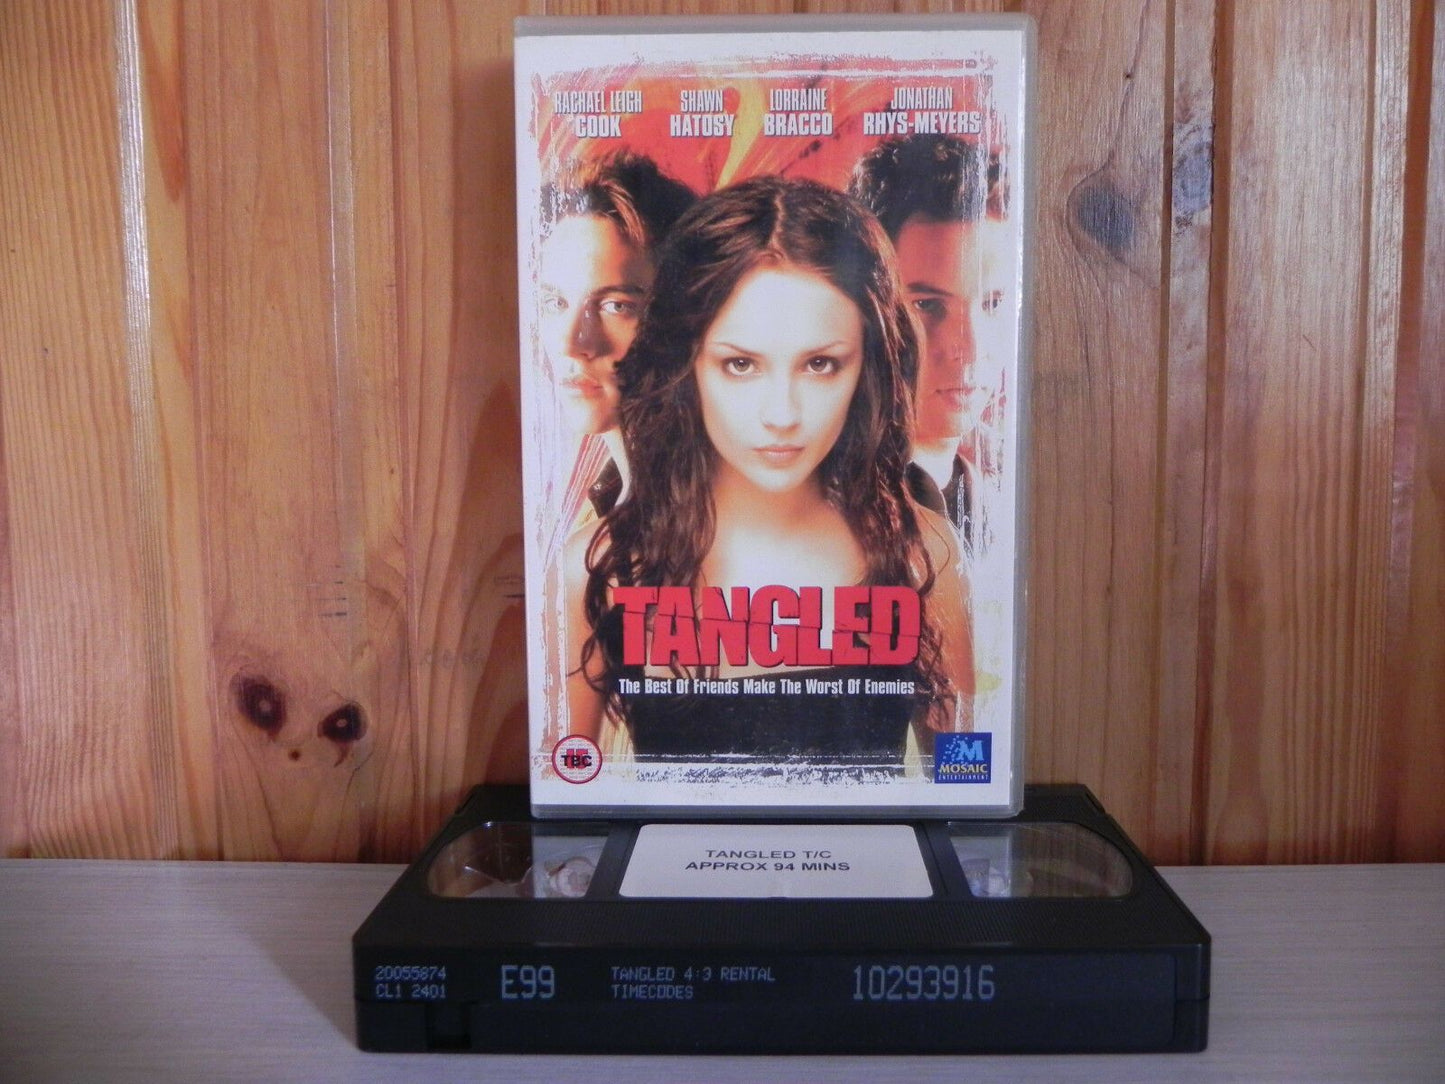 TANGLED - SAMPLE VIDEO - Rachael Leigh Cook - Mystery Thriller - Mosaic - VHS-